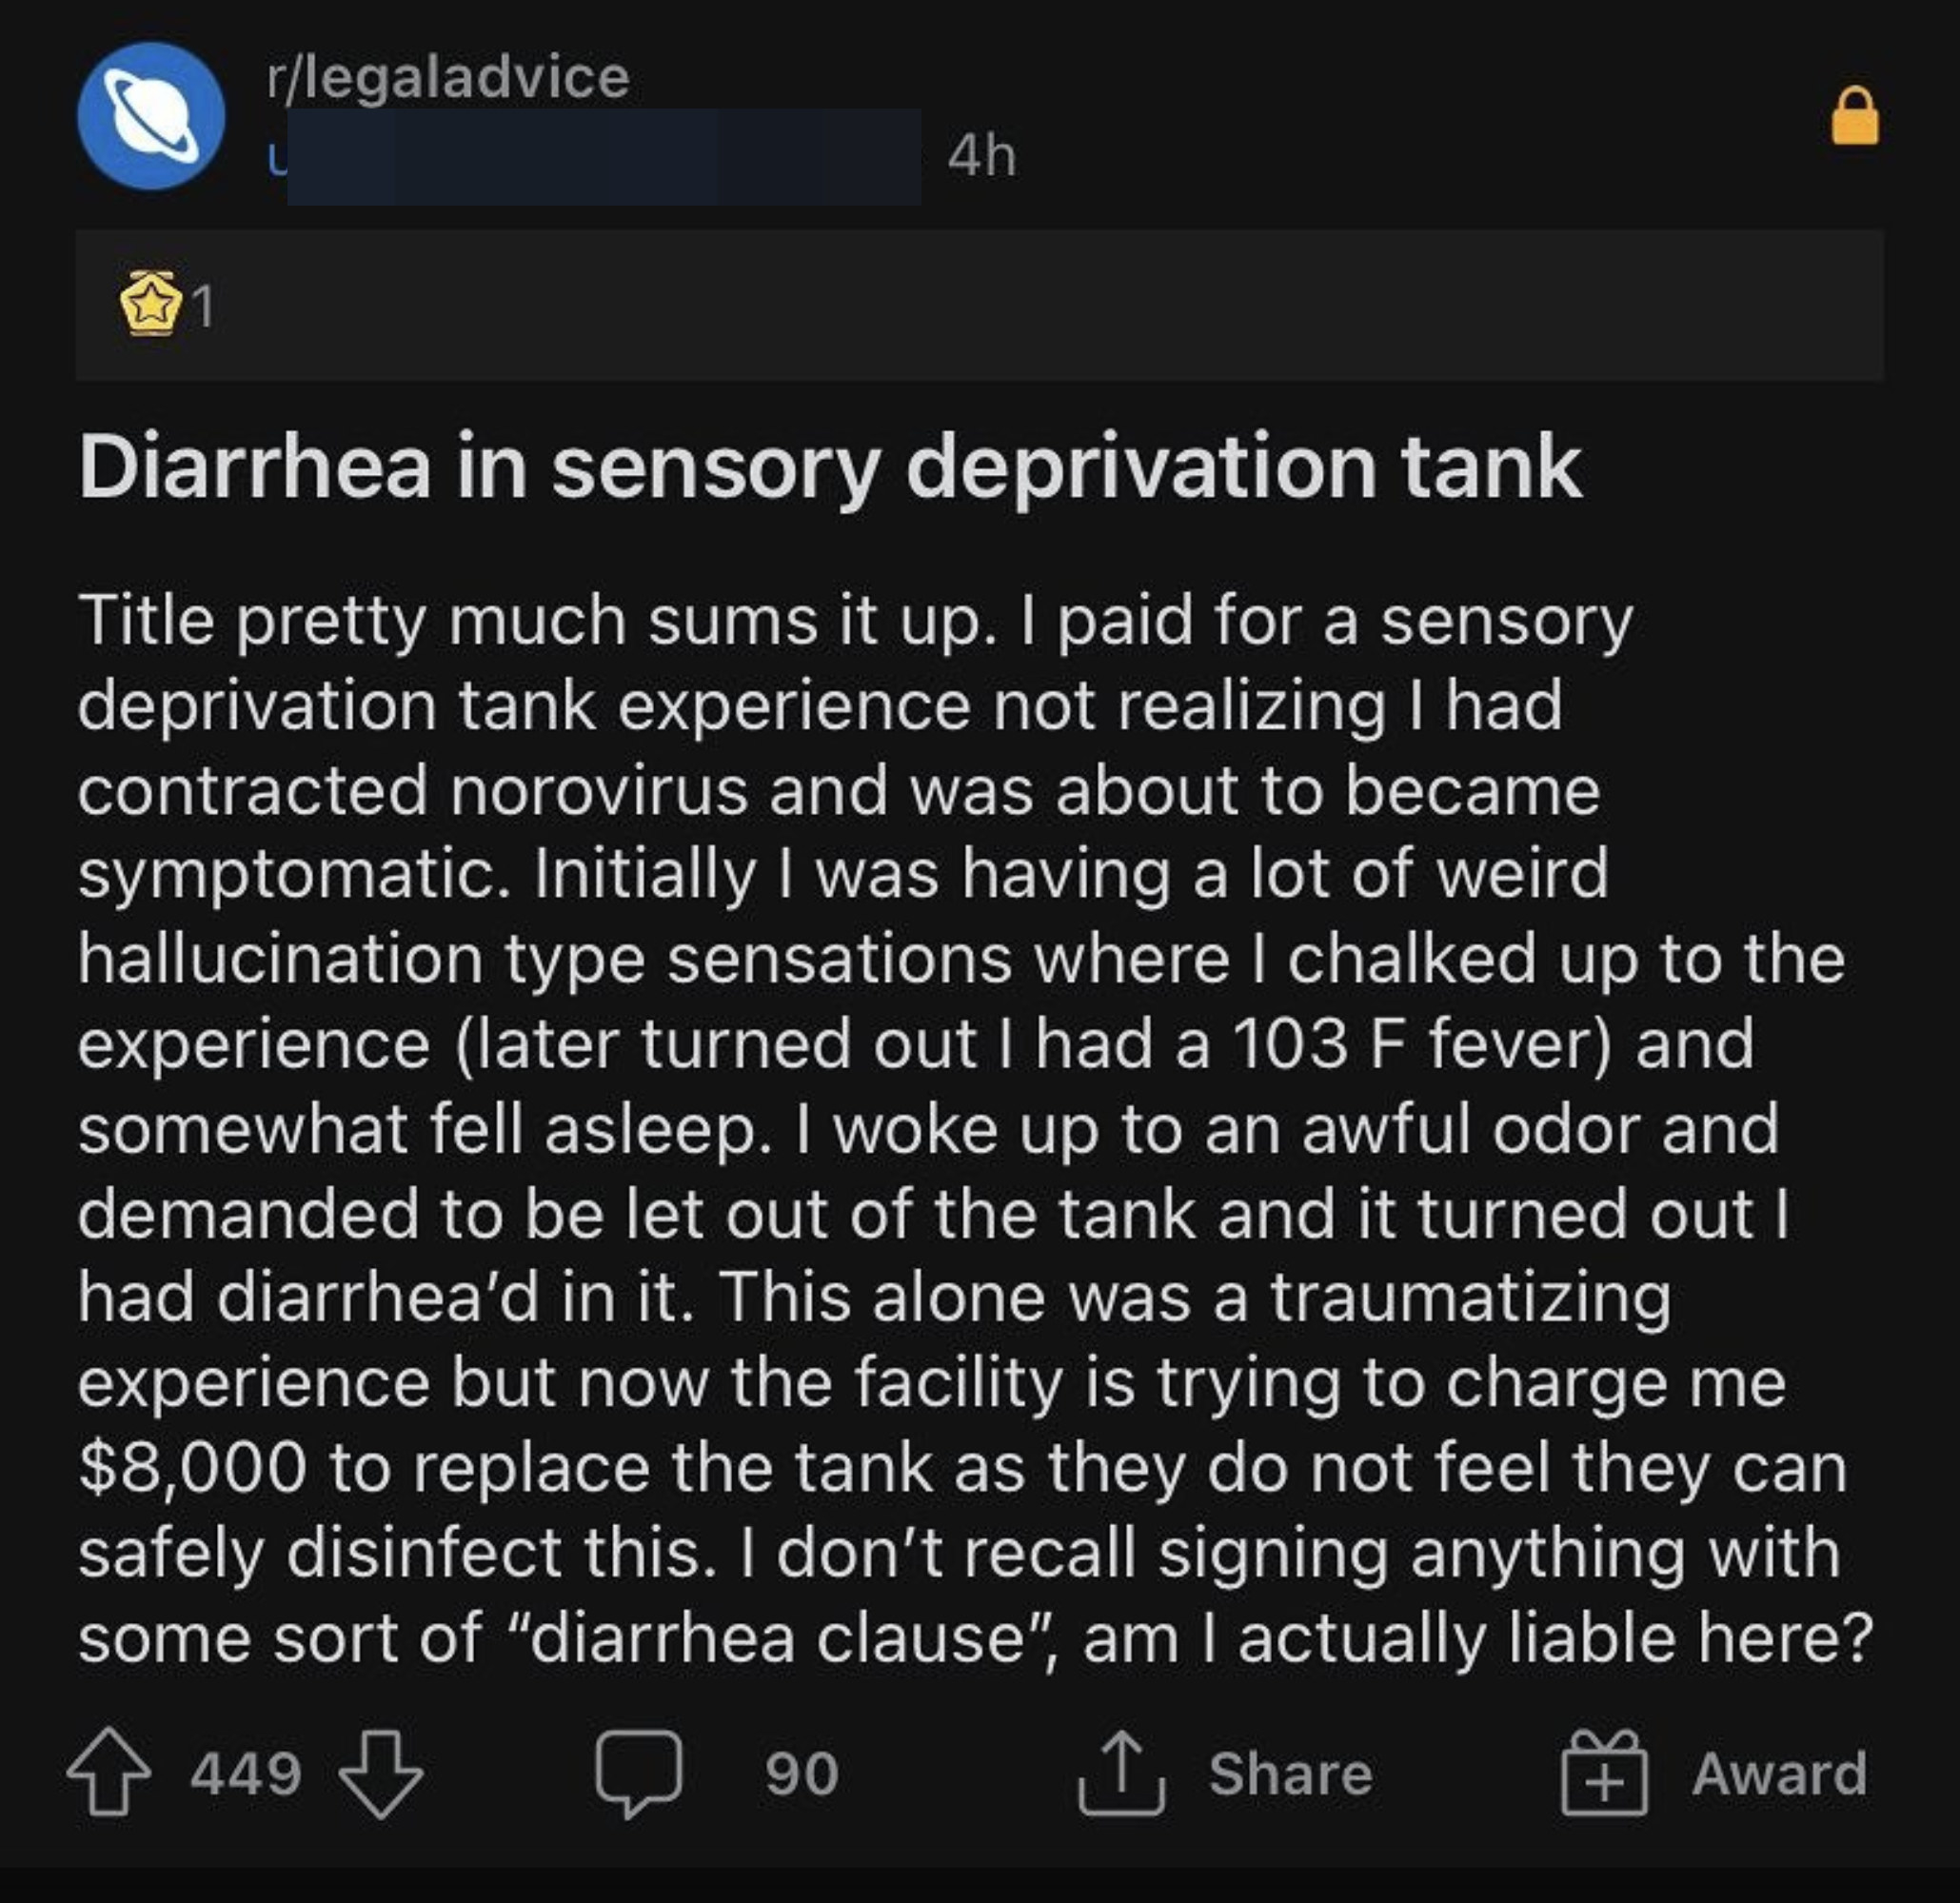 story about a guy getting diarrhea in a sensory deprivation tank